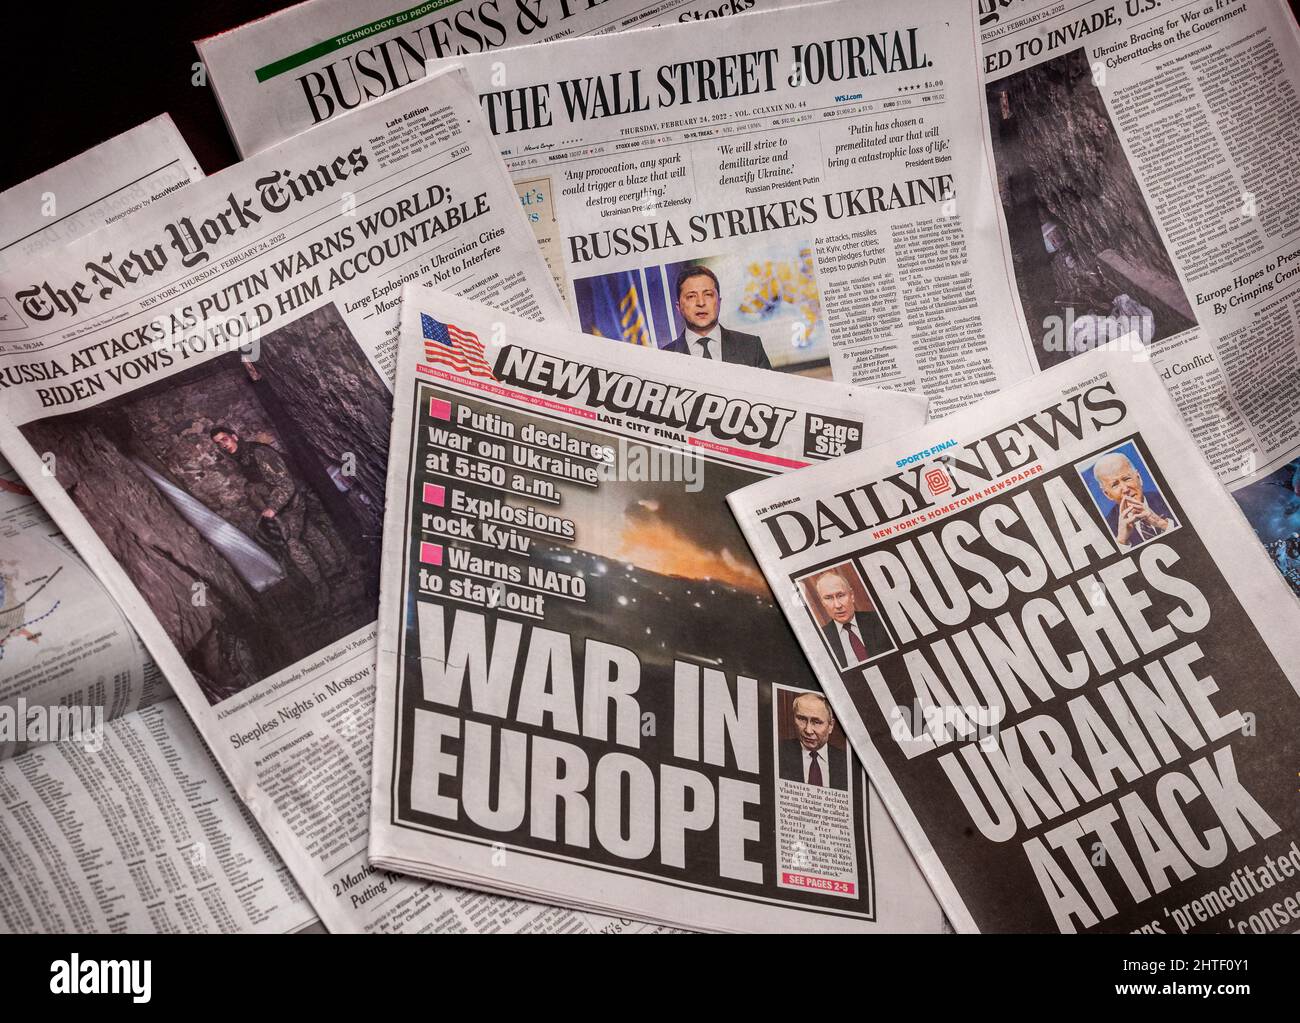 New York newspapers on Thursday, February 24, 2022 report on the previous nights’ invasion of Ukraine by Russian military forces. (© Richard B. Levine) Stock Photo